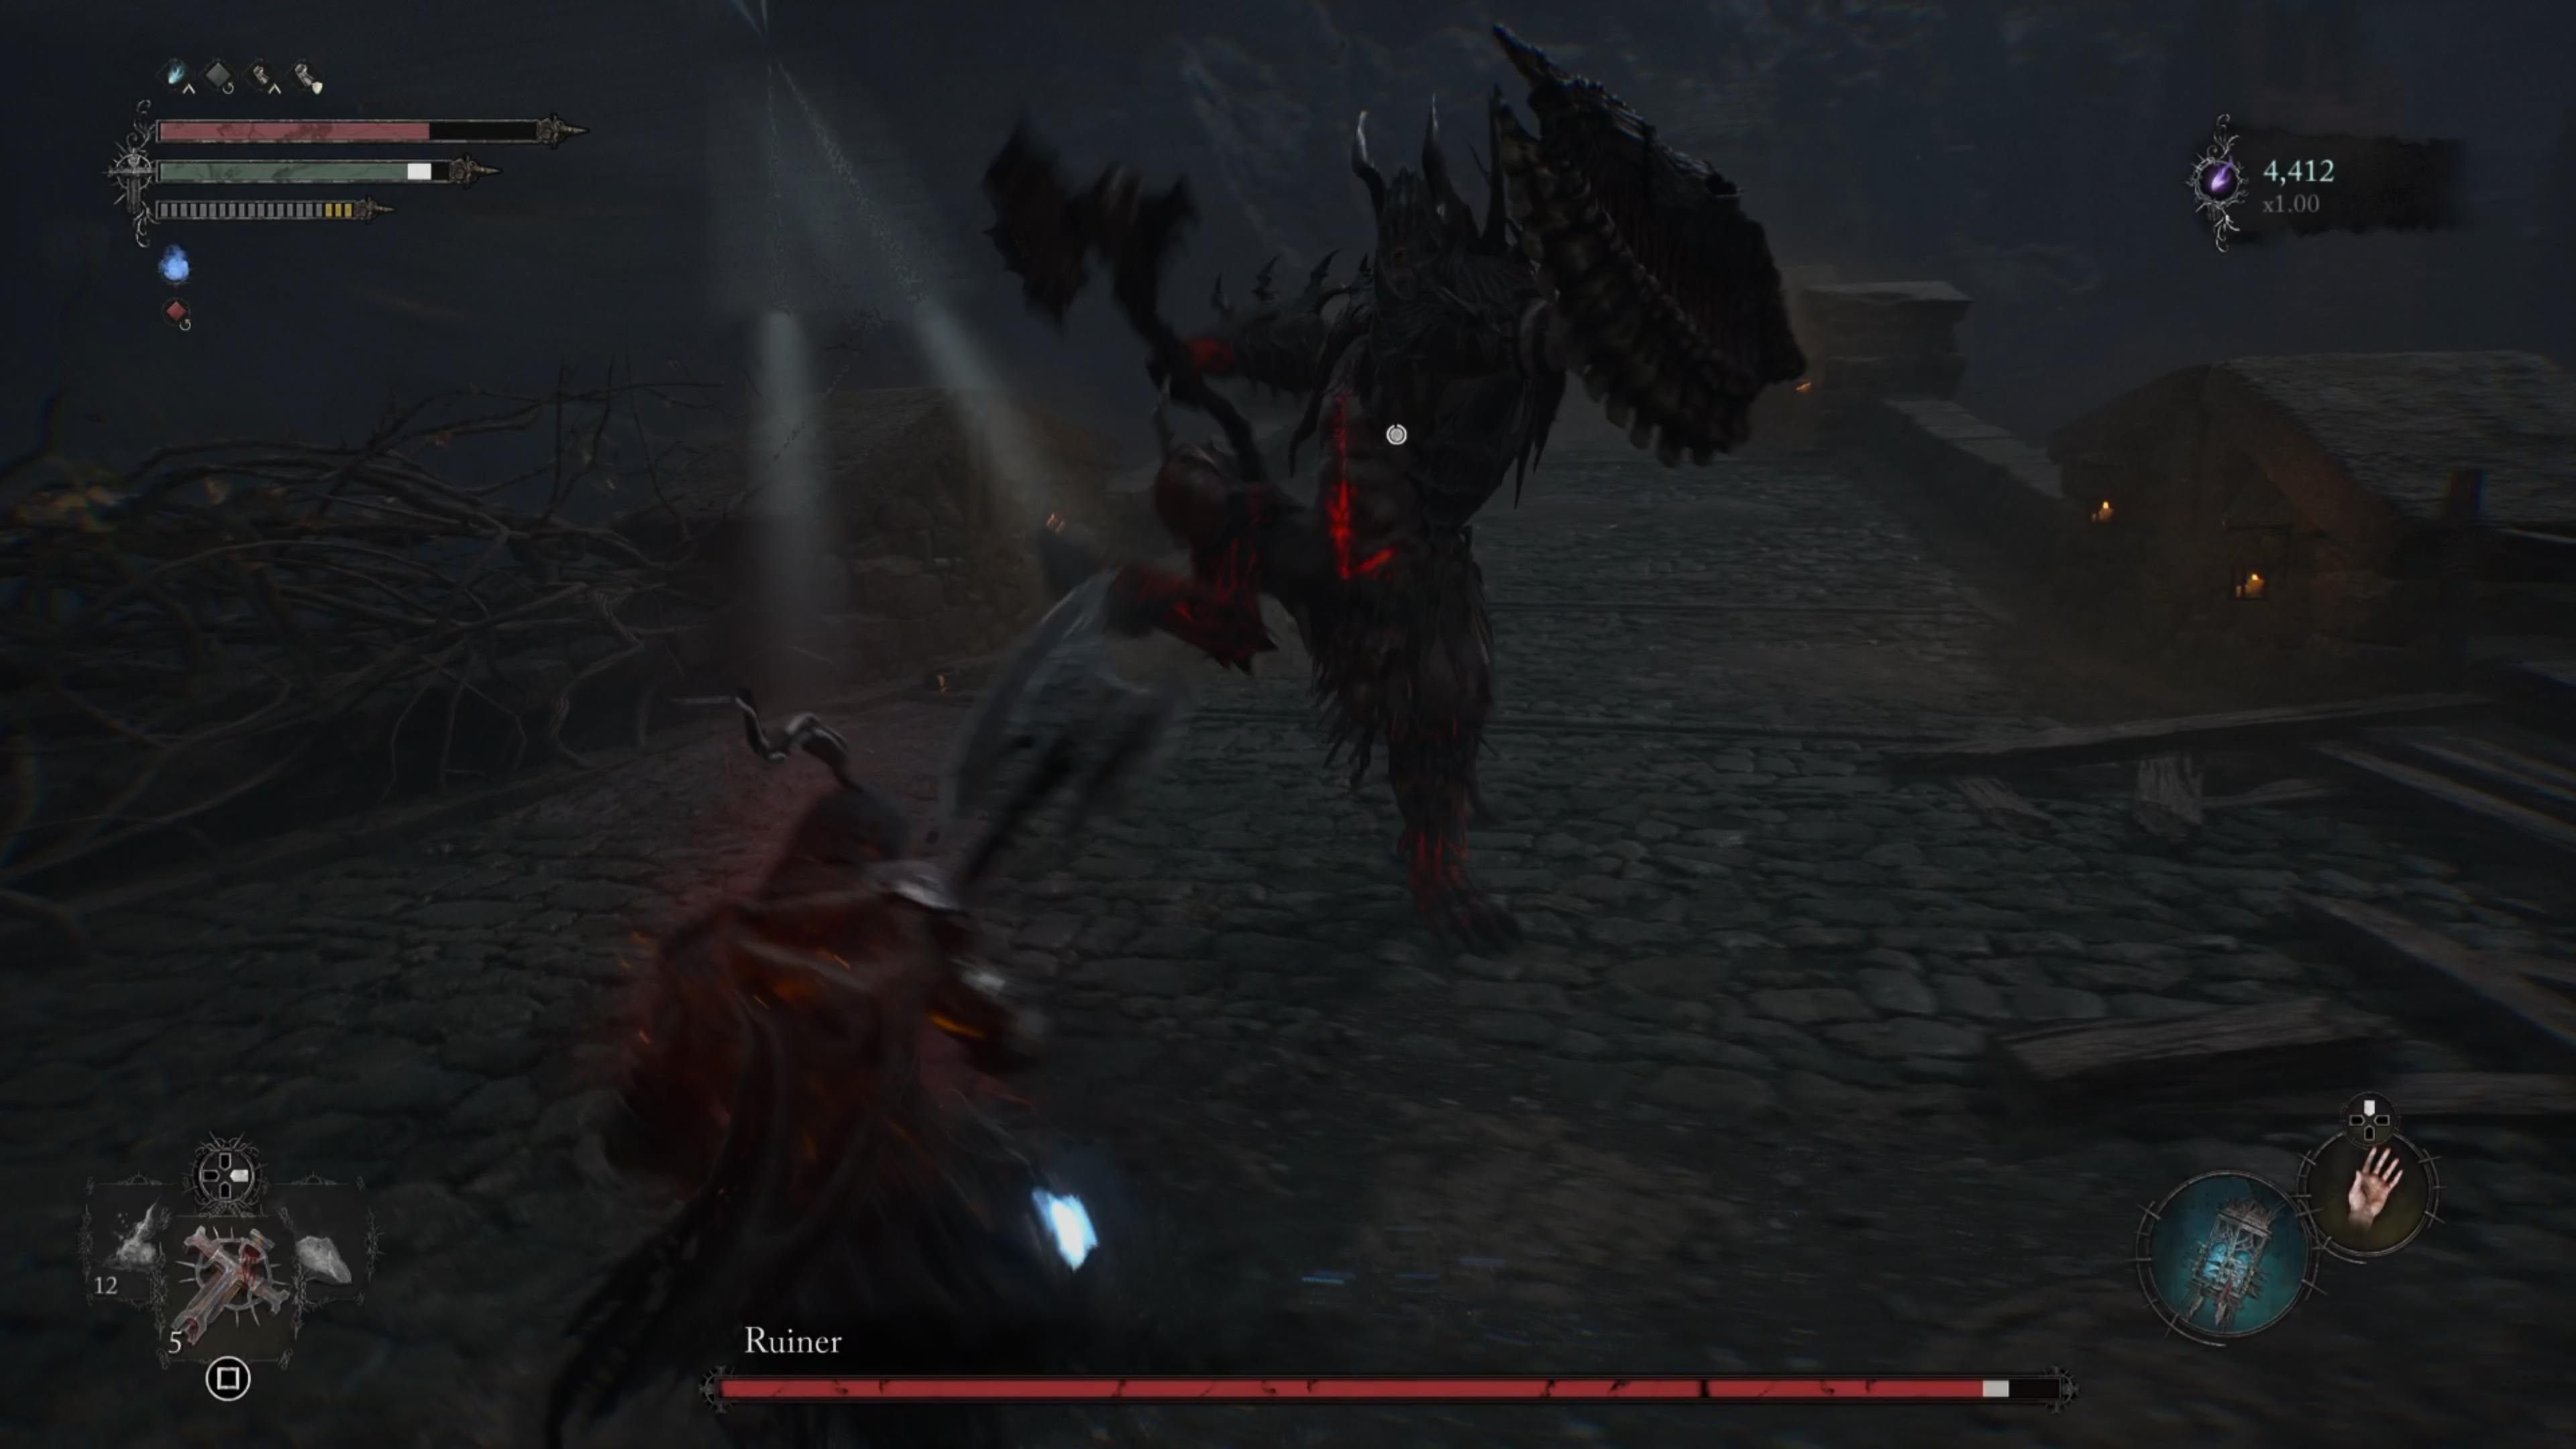 Ruiner Boss foot slam attack in Lords of the Fallen